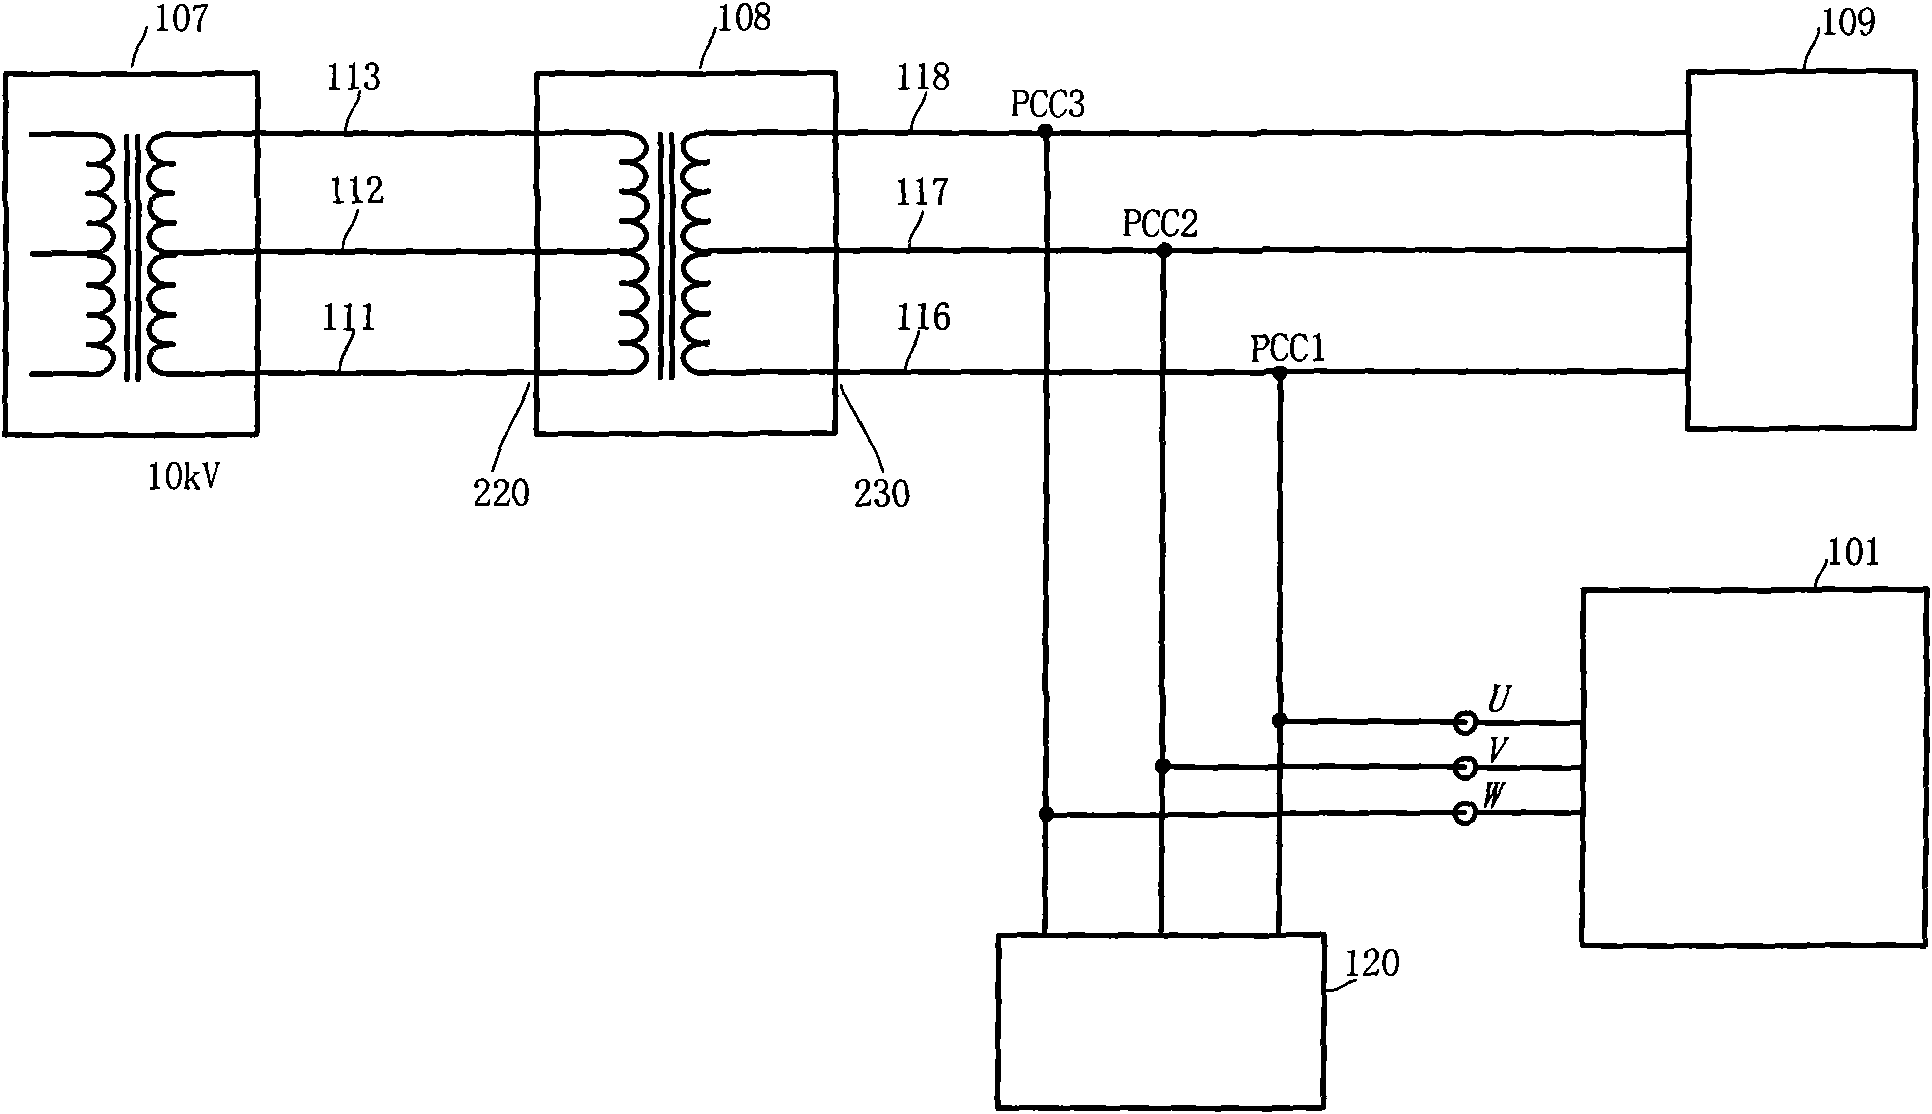 Balancing power distribution system of 10kV and below power distribution network